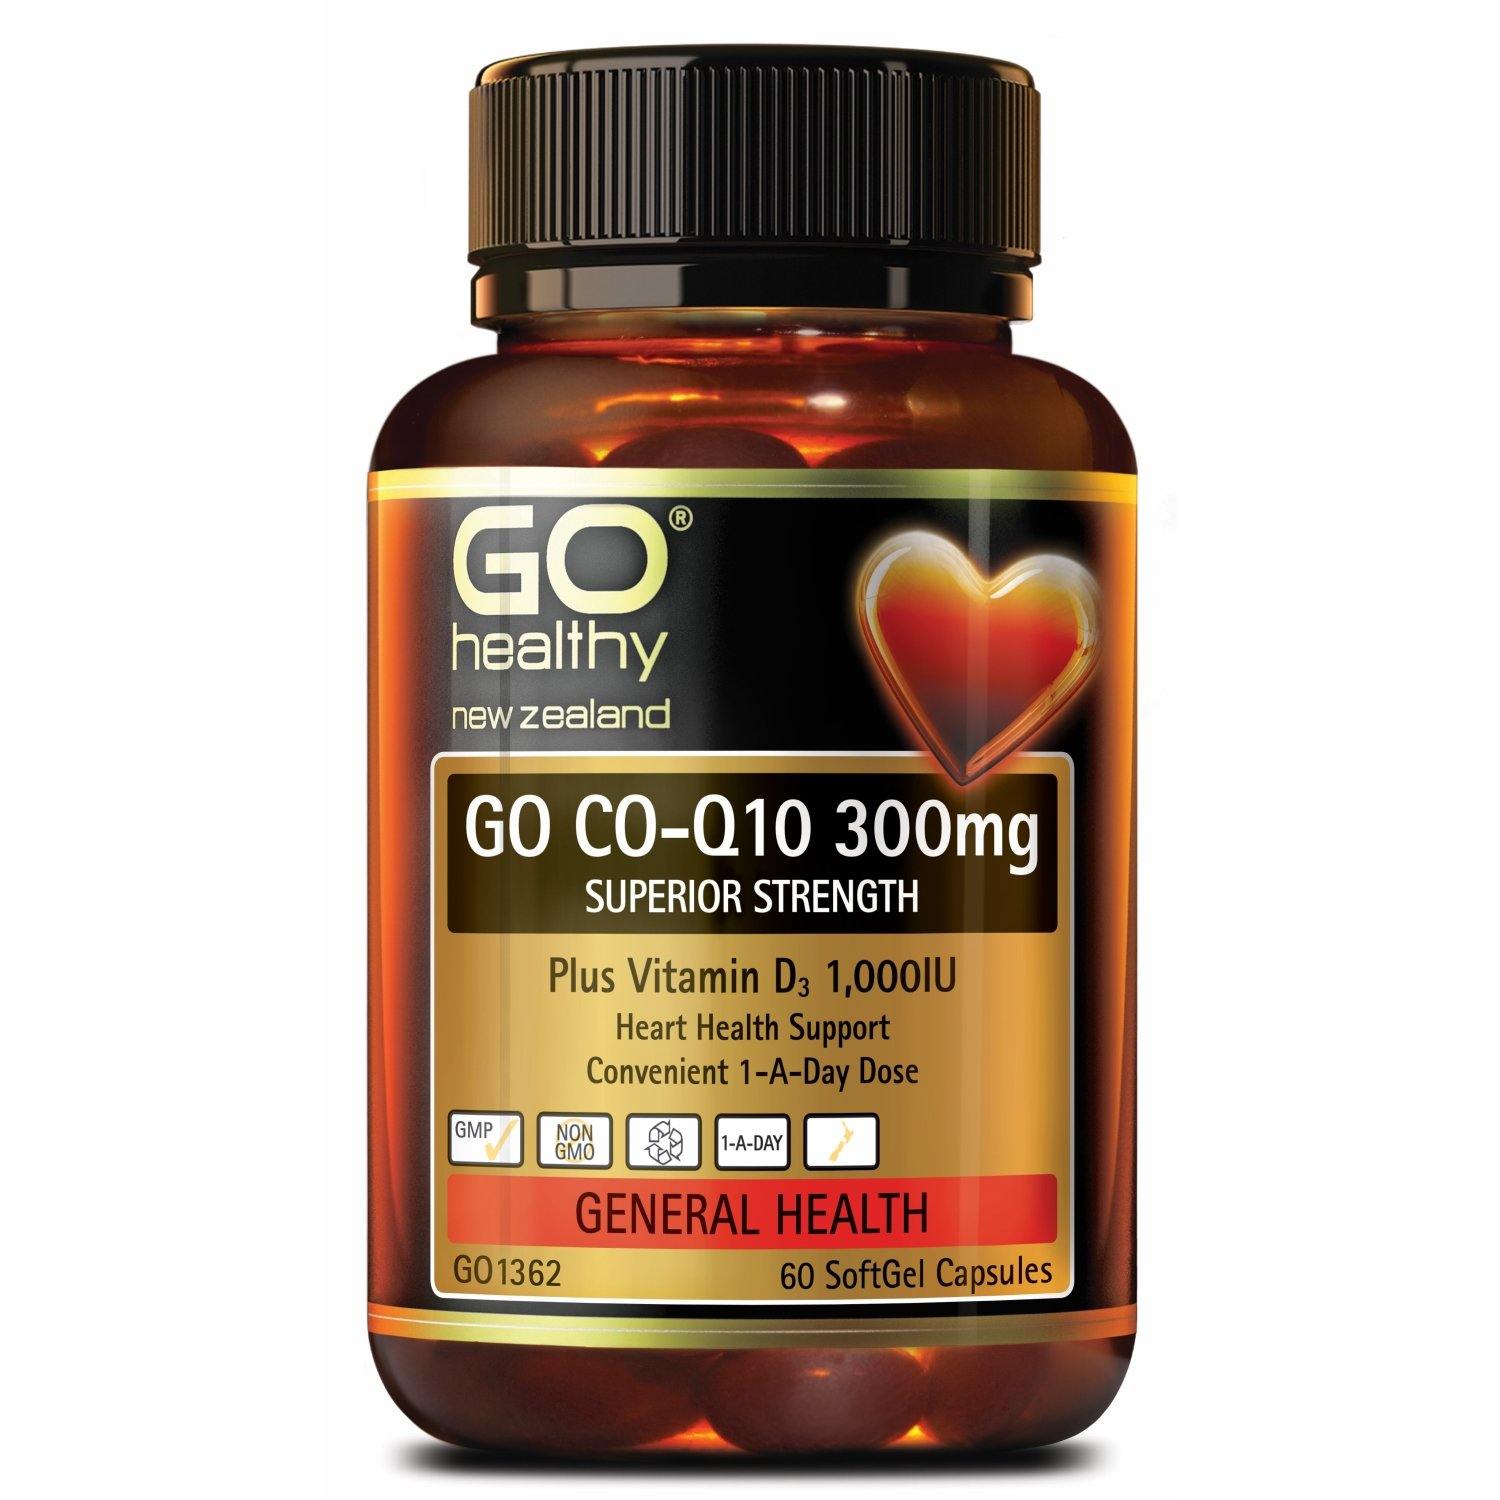 Buy 3 Get 1 Free - Go Healthy Co-Q10 300mg +VitD 1000IU 60 capsules - Function: Cholesterol Control, Function: Energy, Ingredient: Co enzyme Q10, nz made, Price  $150-$500, Specials, Vendor  Go Healthy - Aotea Wellness